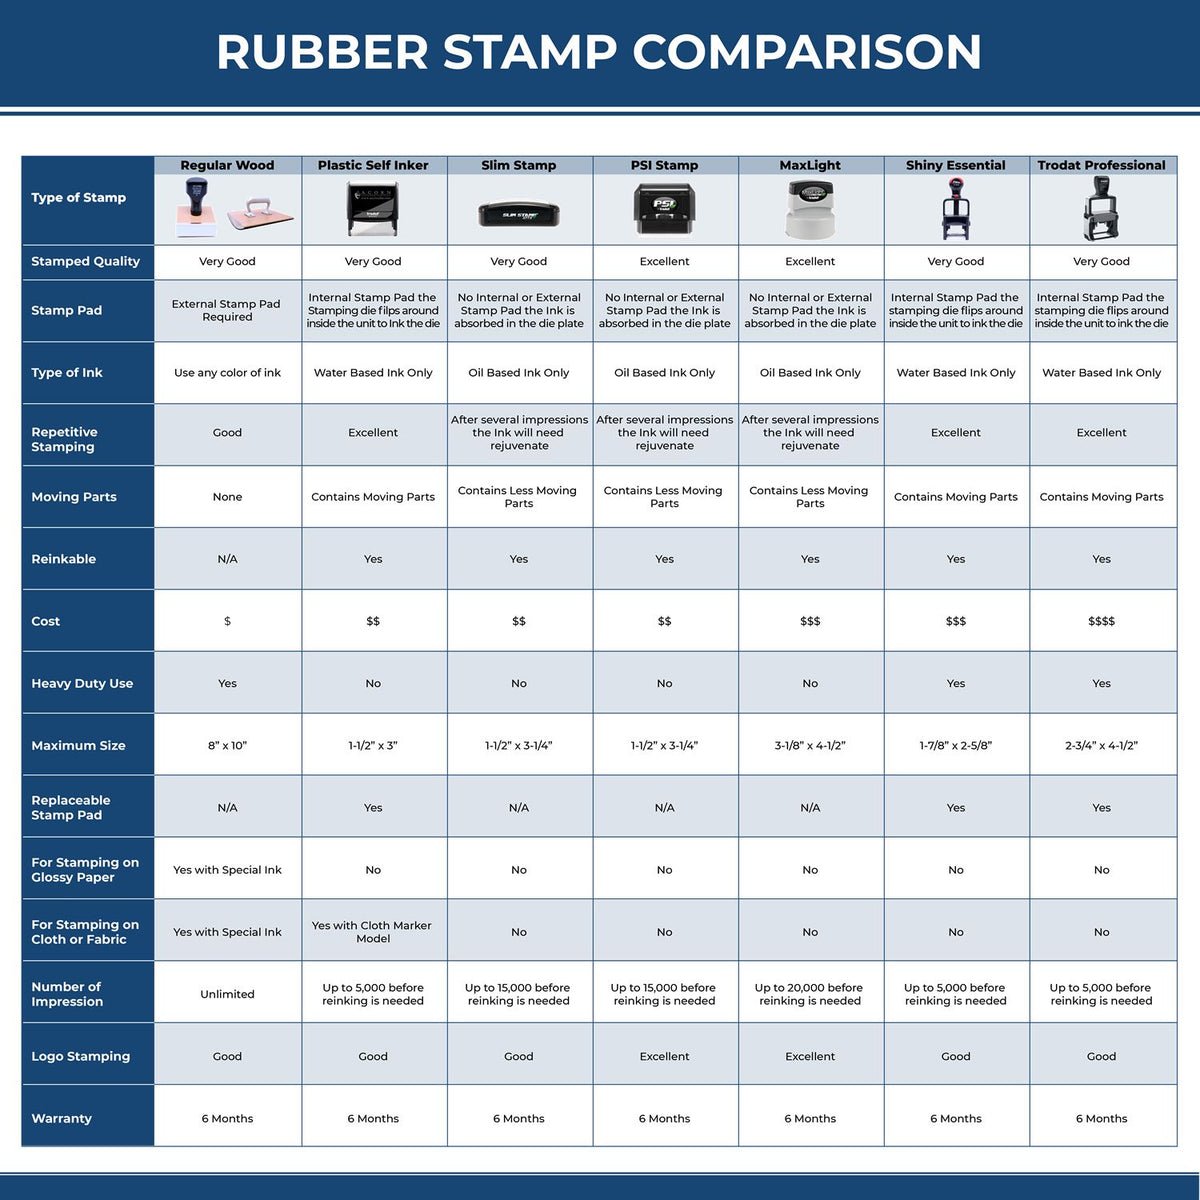 Large Self Inking Entered Stamp 4123S Rubber Stamp Comparison